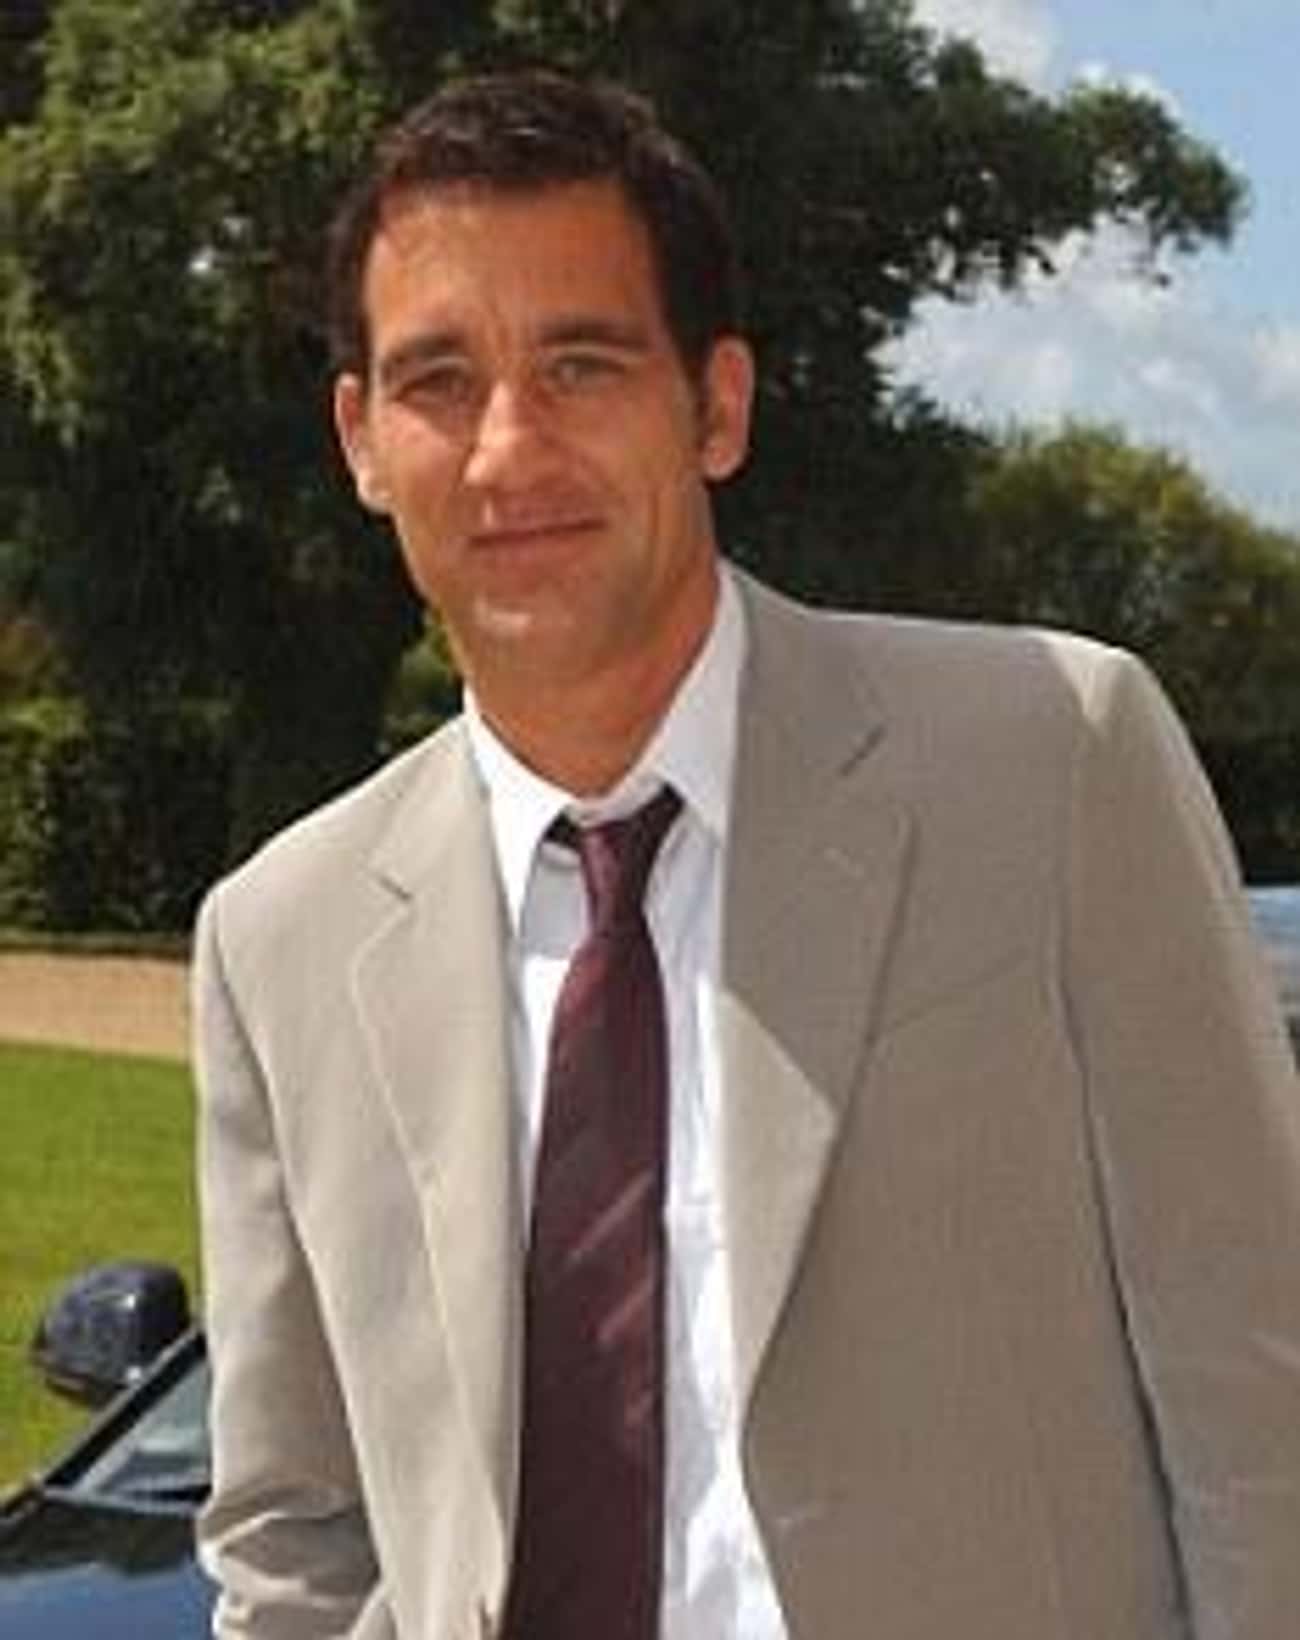 Clive Owen in Grayish Tan Coat and Brown Neckie